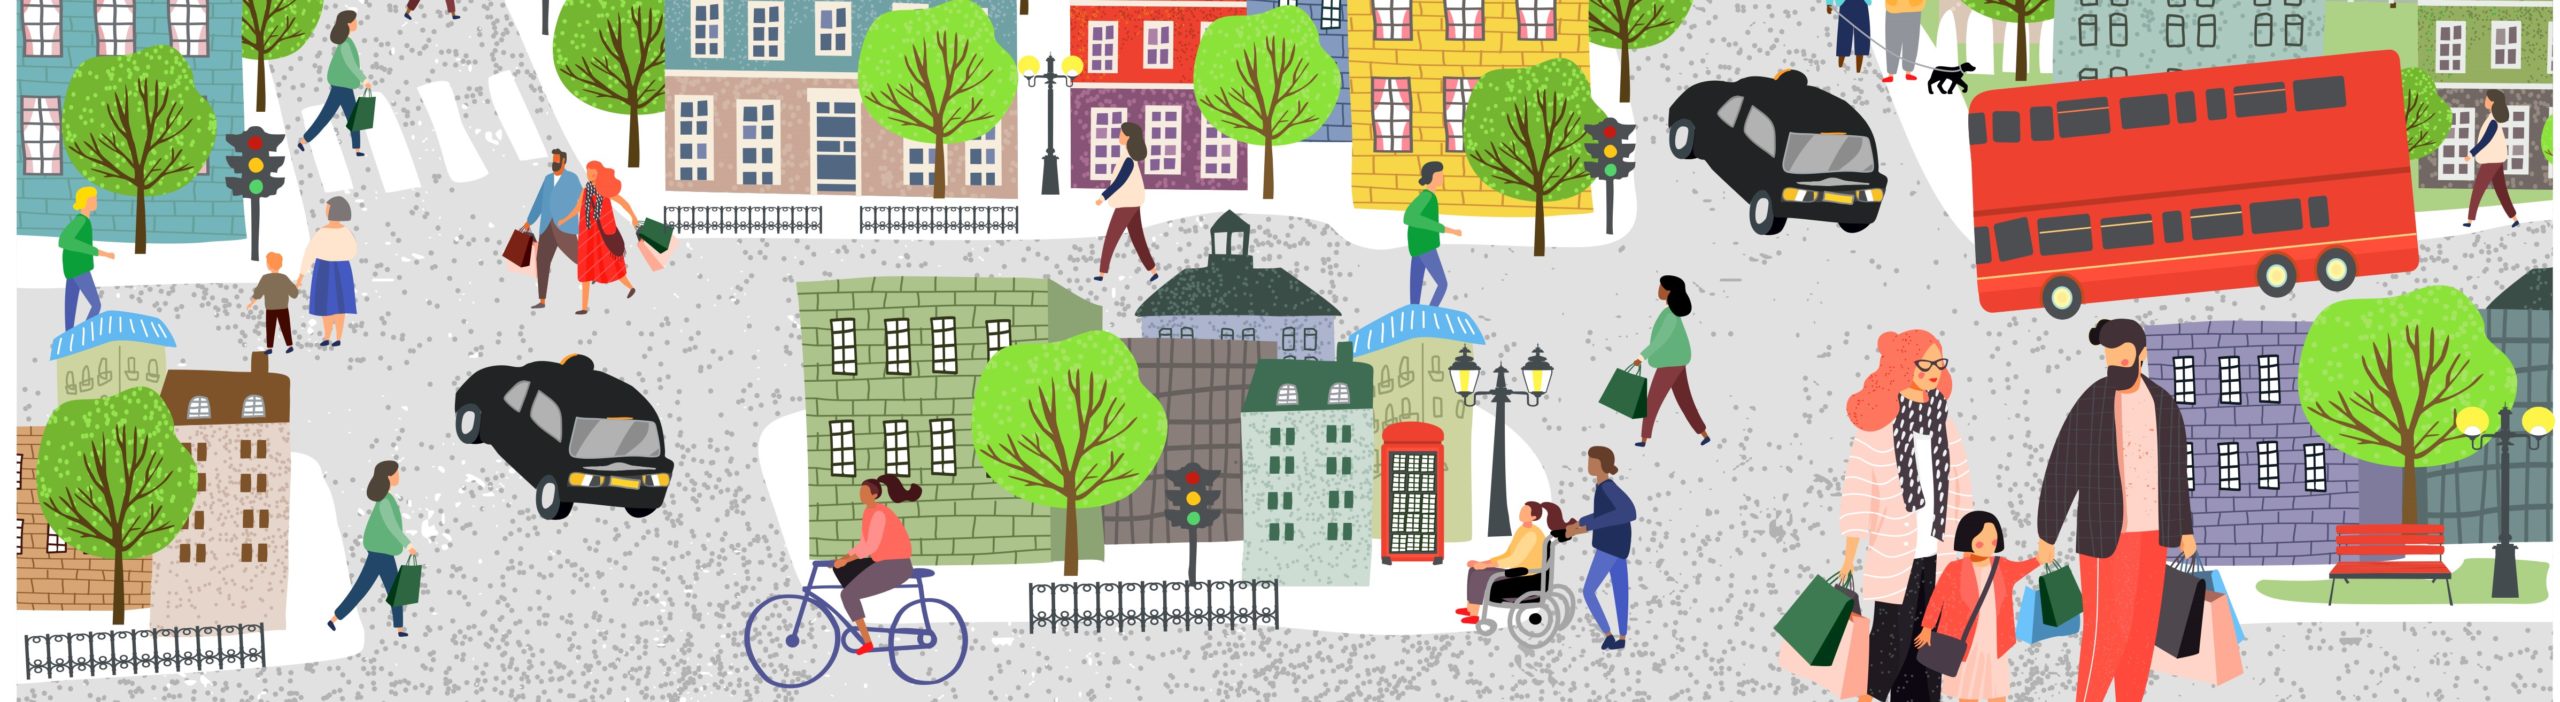 Colourful illustration of people in London